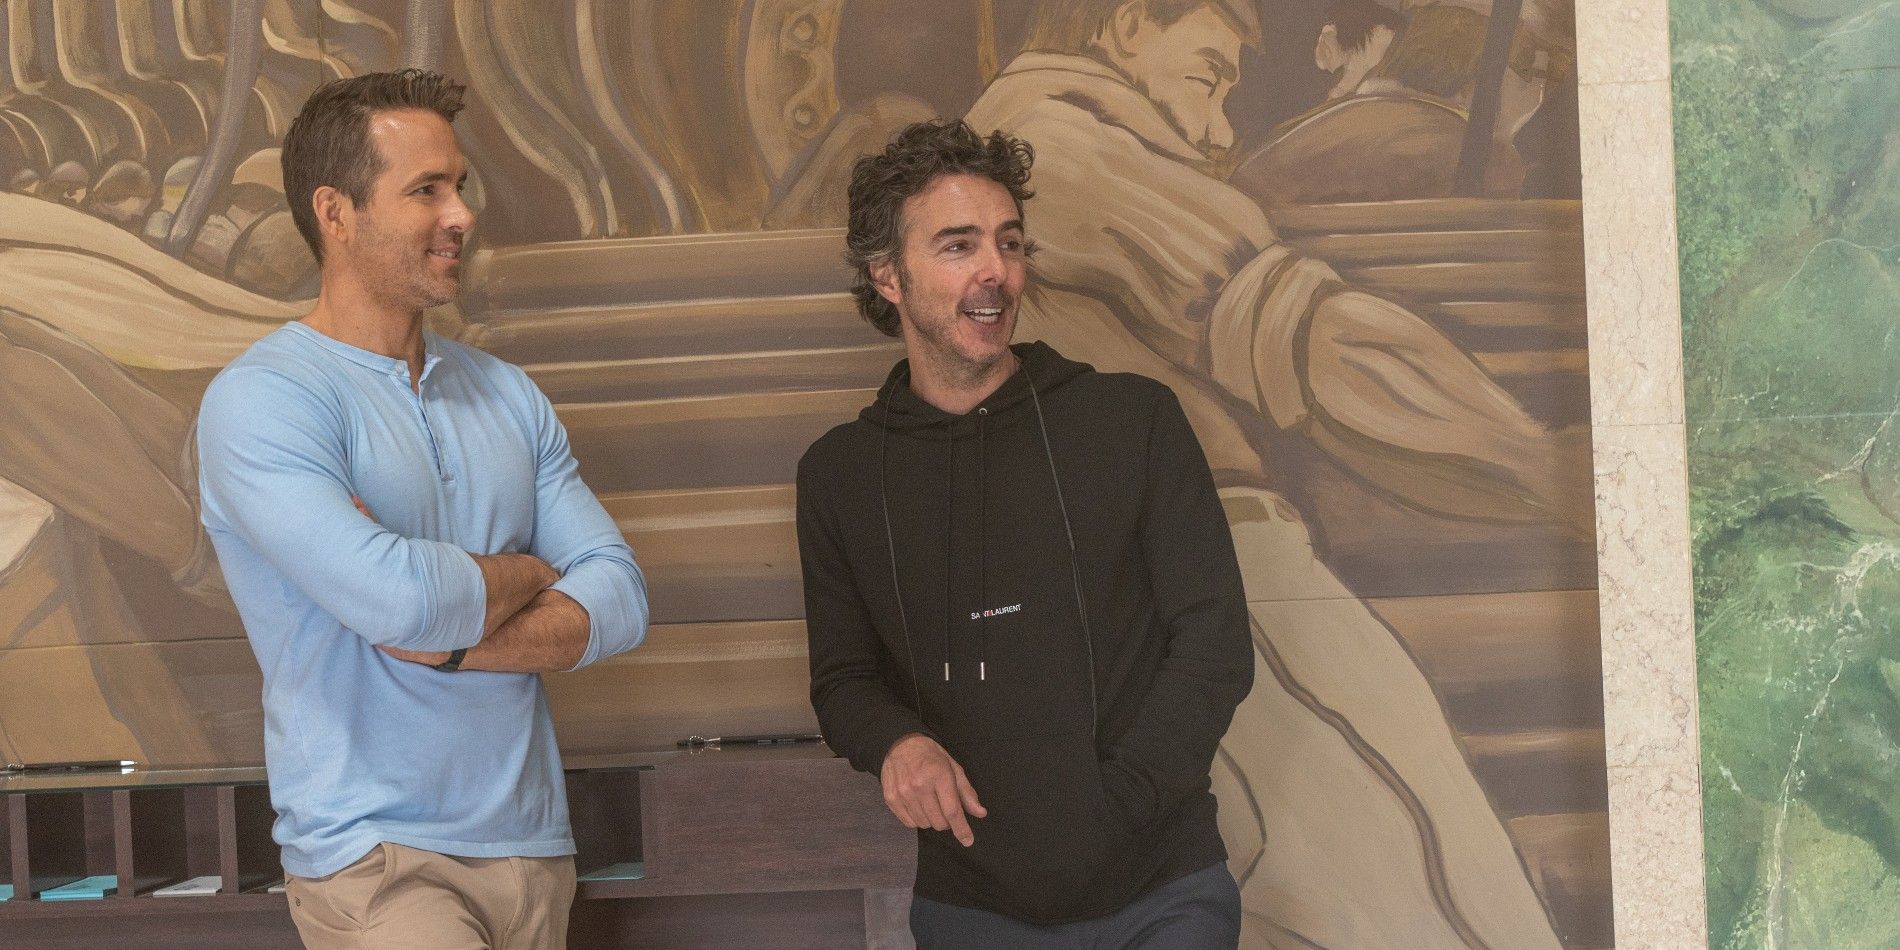 Free Guy's Ryan Reynolds and Shawn Levy are making 3 secret movies together  | Esquire Middle East